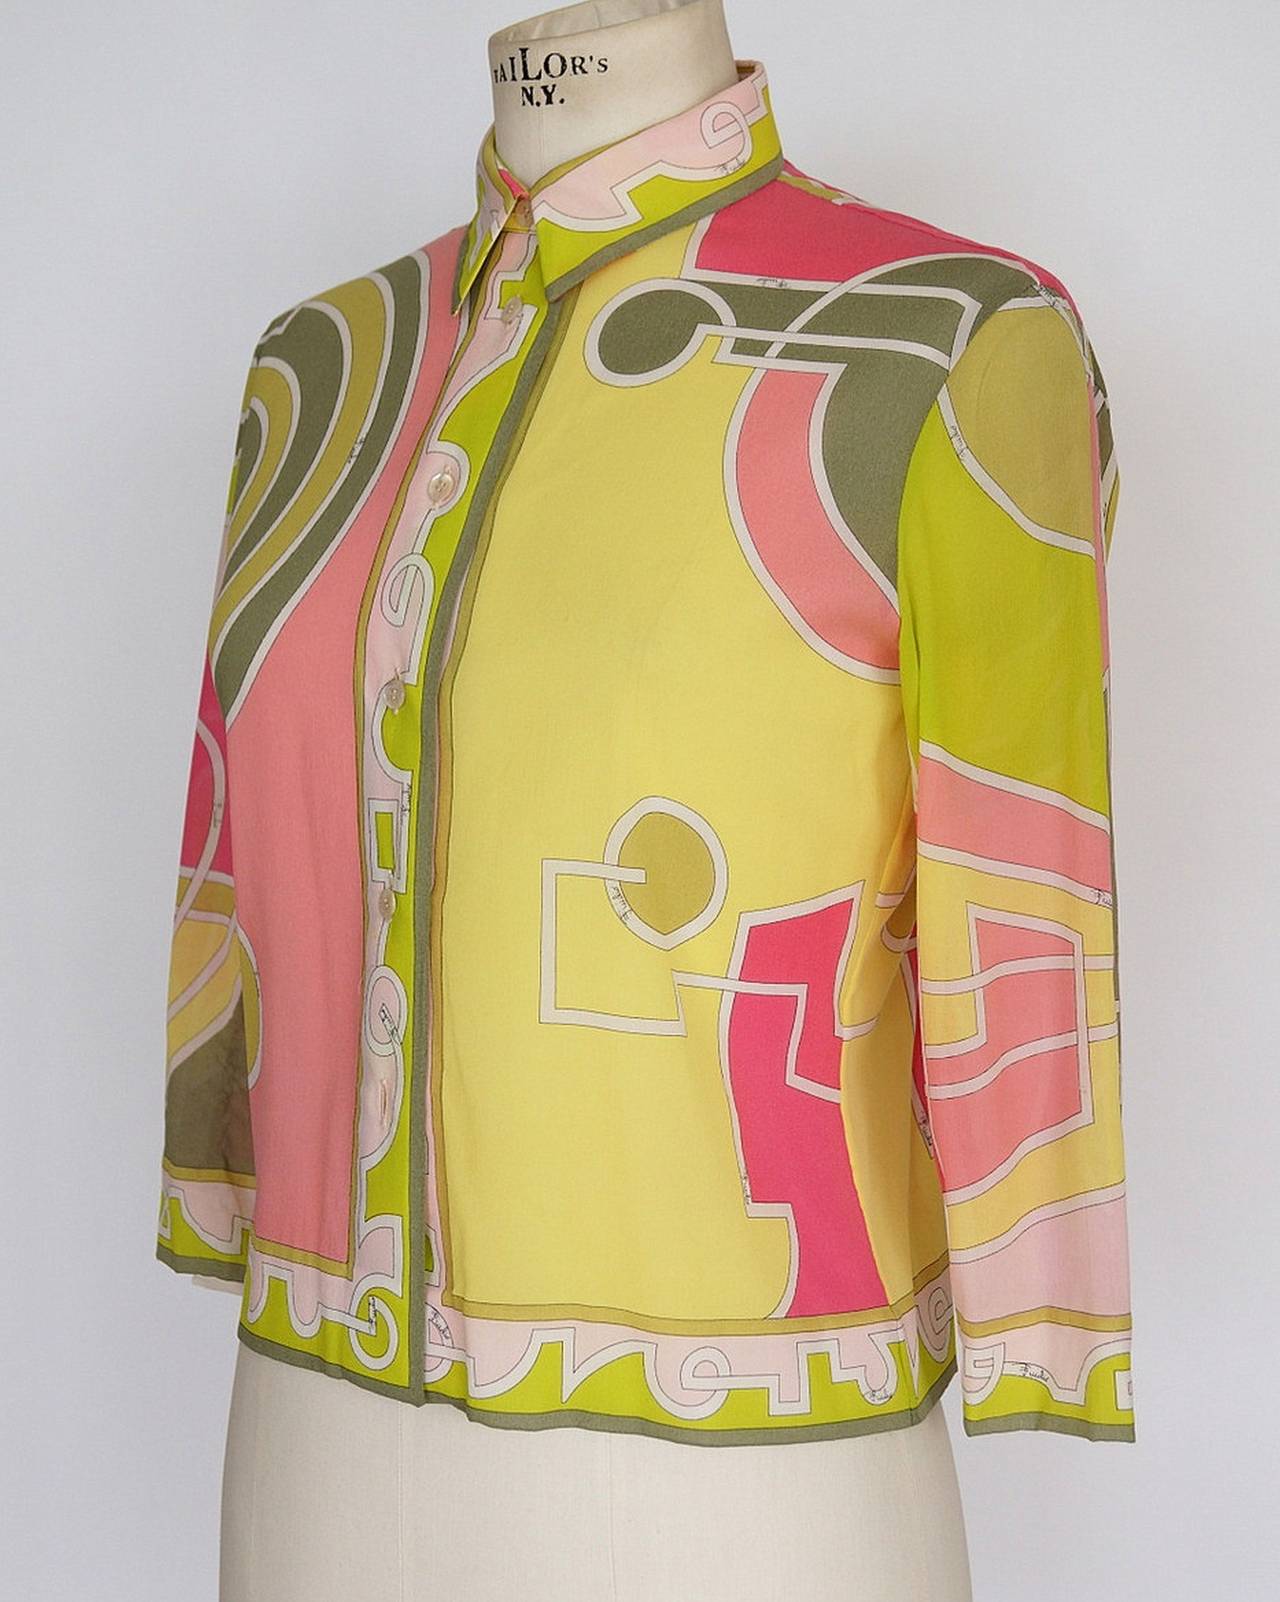 A very pretty and rare late 1960s or early 70s Emilio Pucci silk blouse in a size Small to Medium. The pink, yellow and pale green print is fresh and unusual and not one I have seen before. (I did find a picture of Barbara Eden in a fairly similar